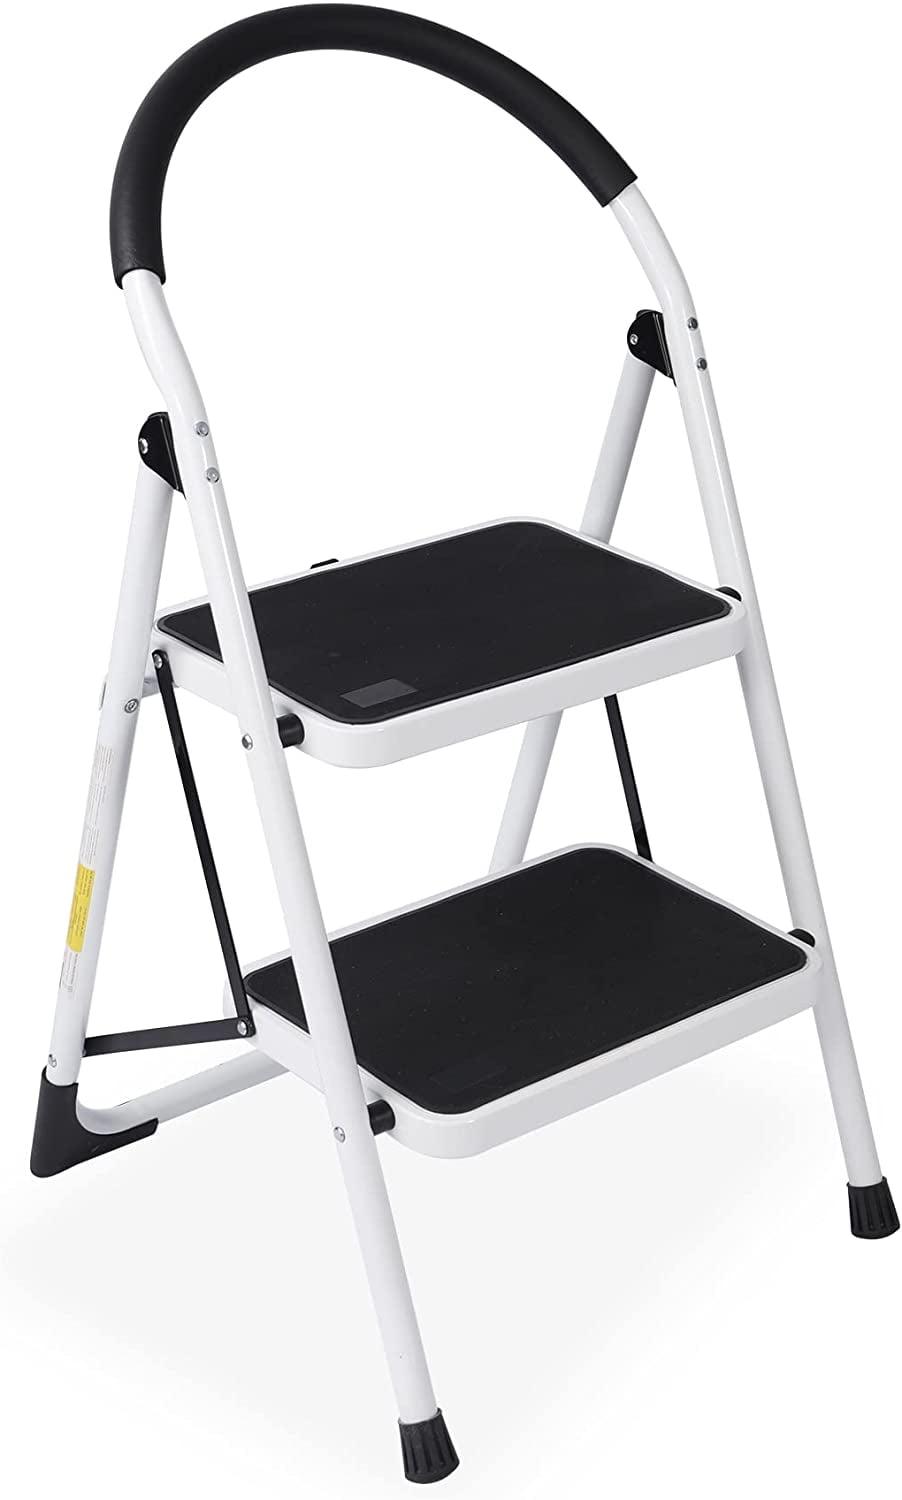 Multi Purpose Folding Step Stools Foldable Seat Ladders Easy Carry Storage Handy 